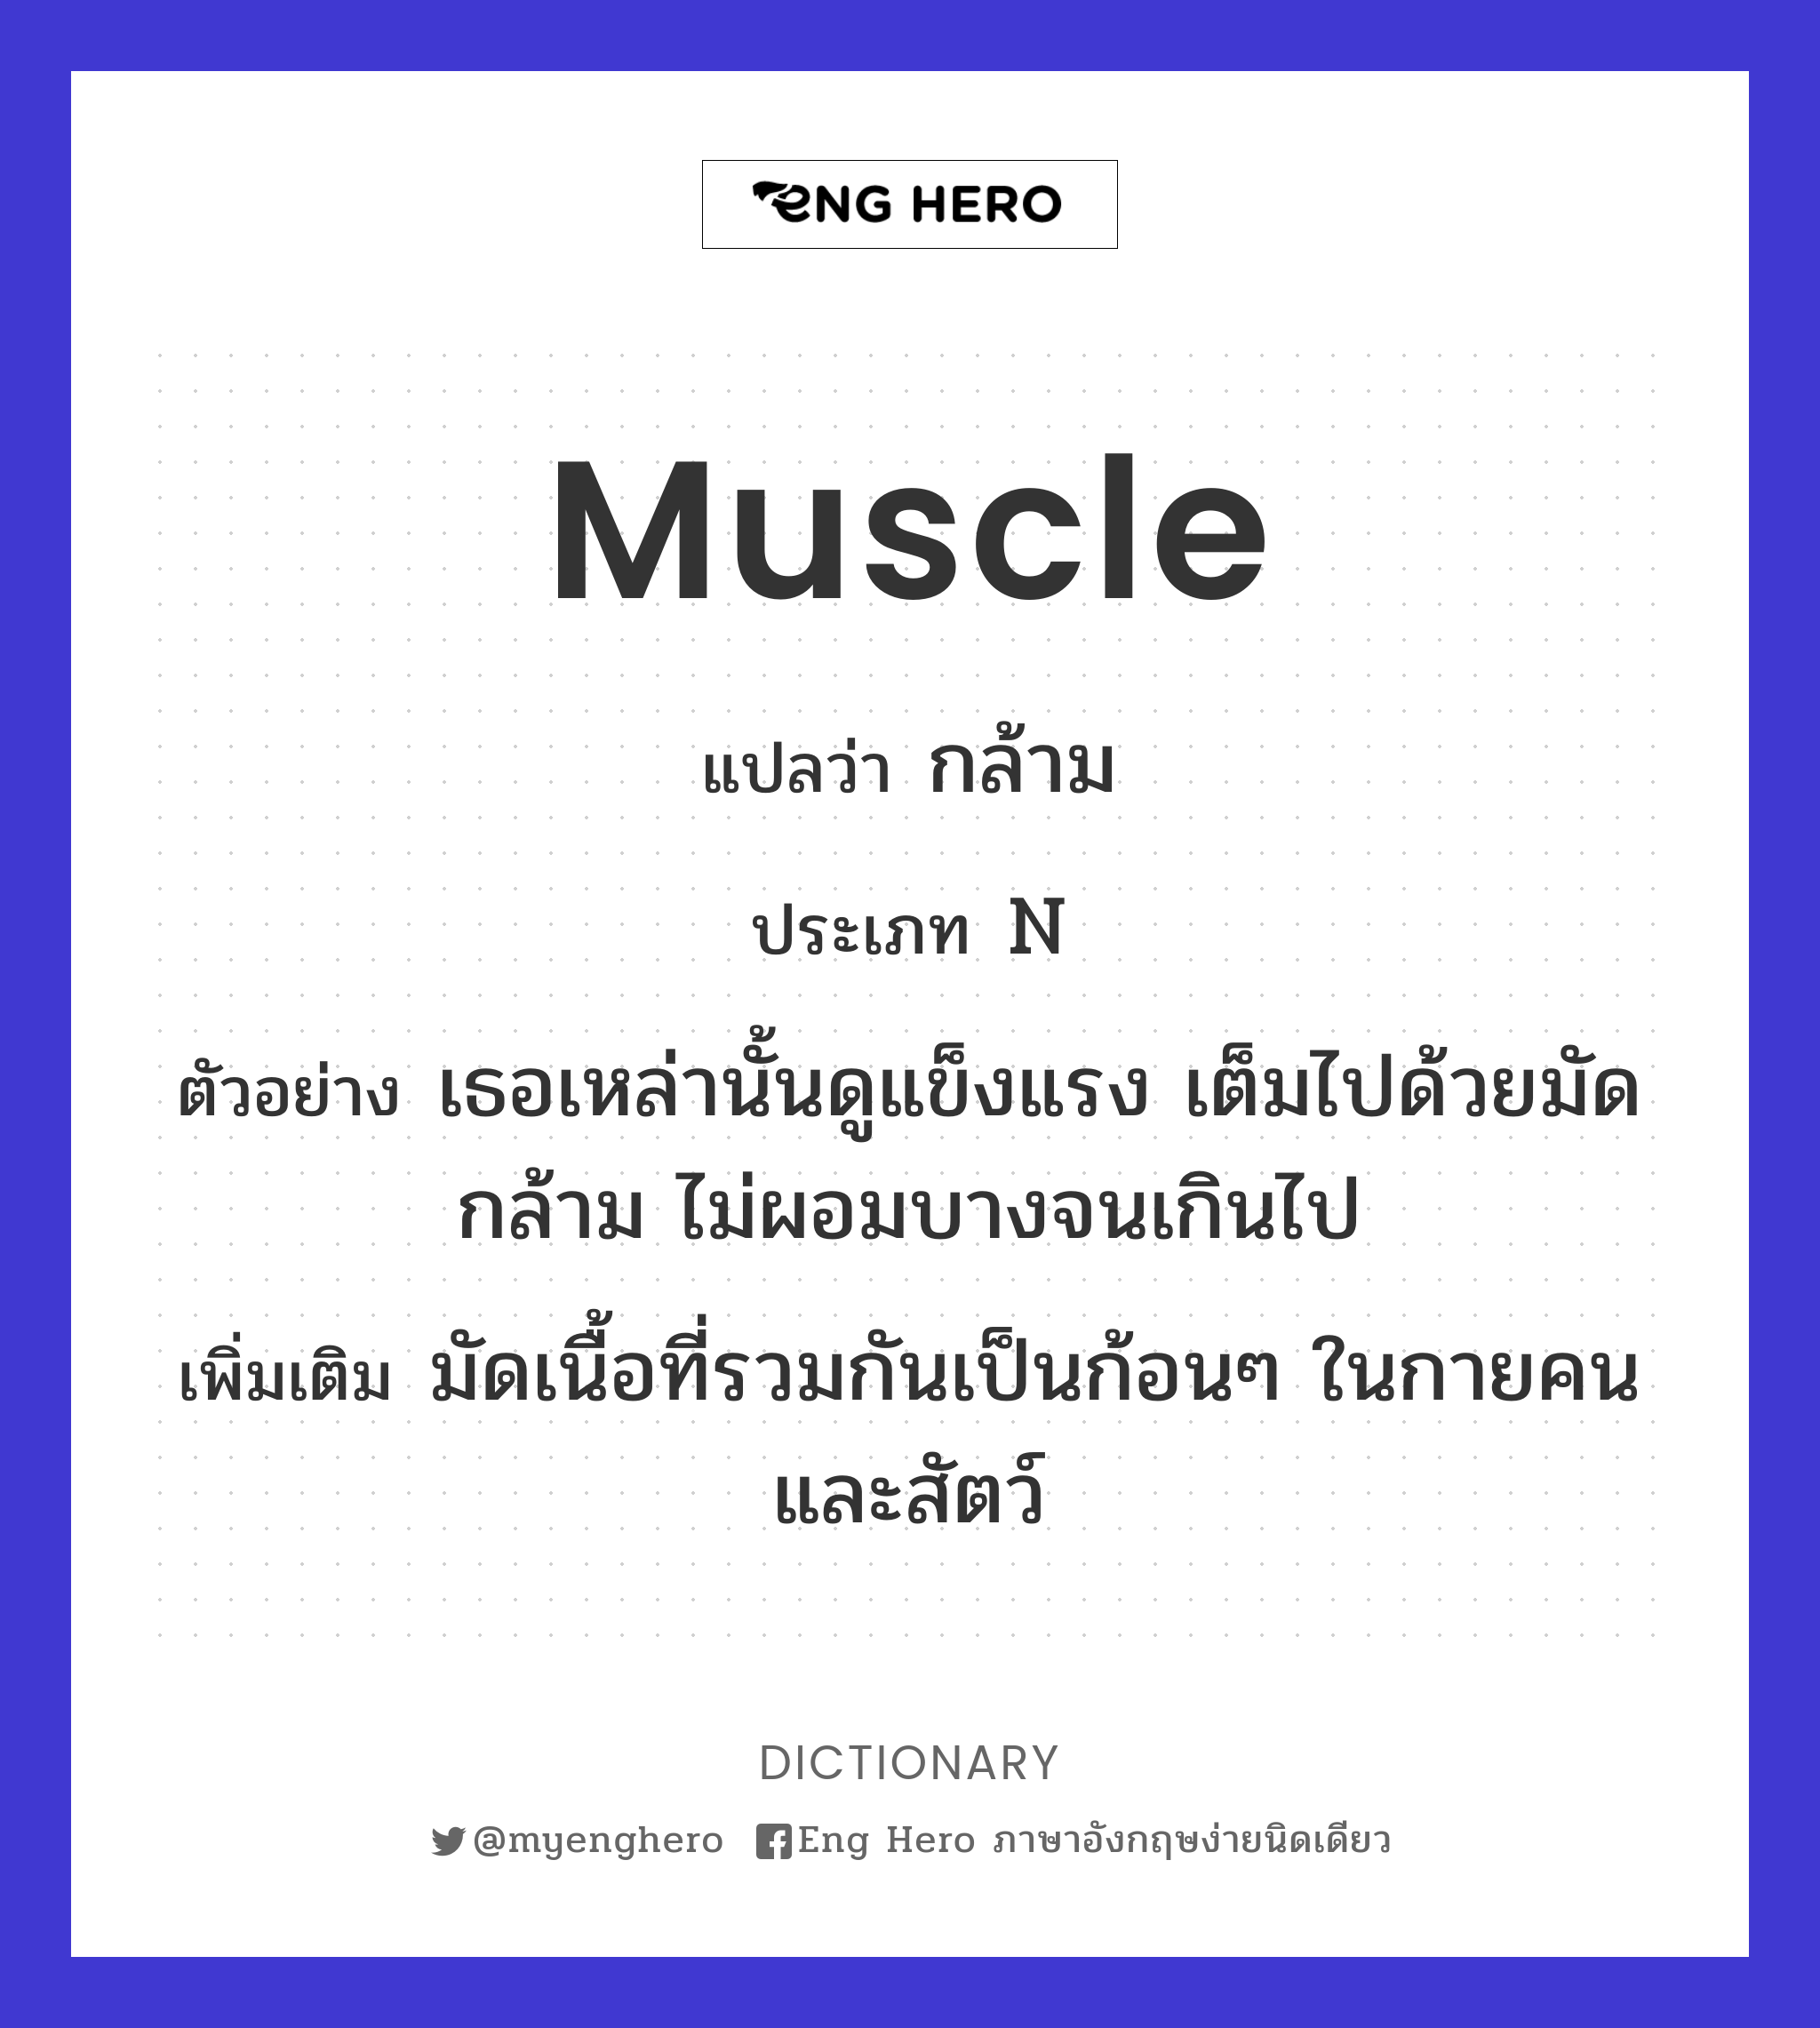 muscle